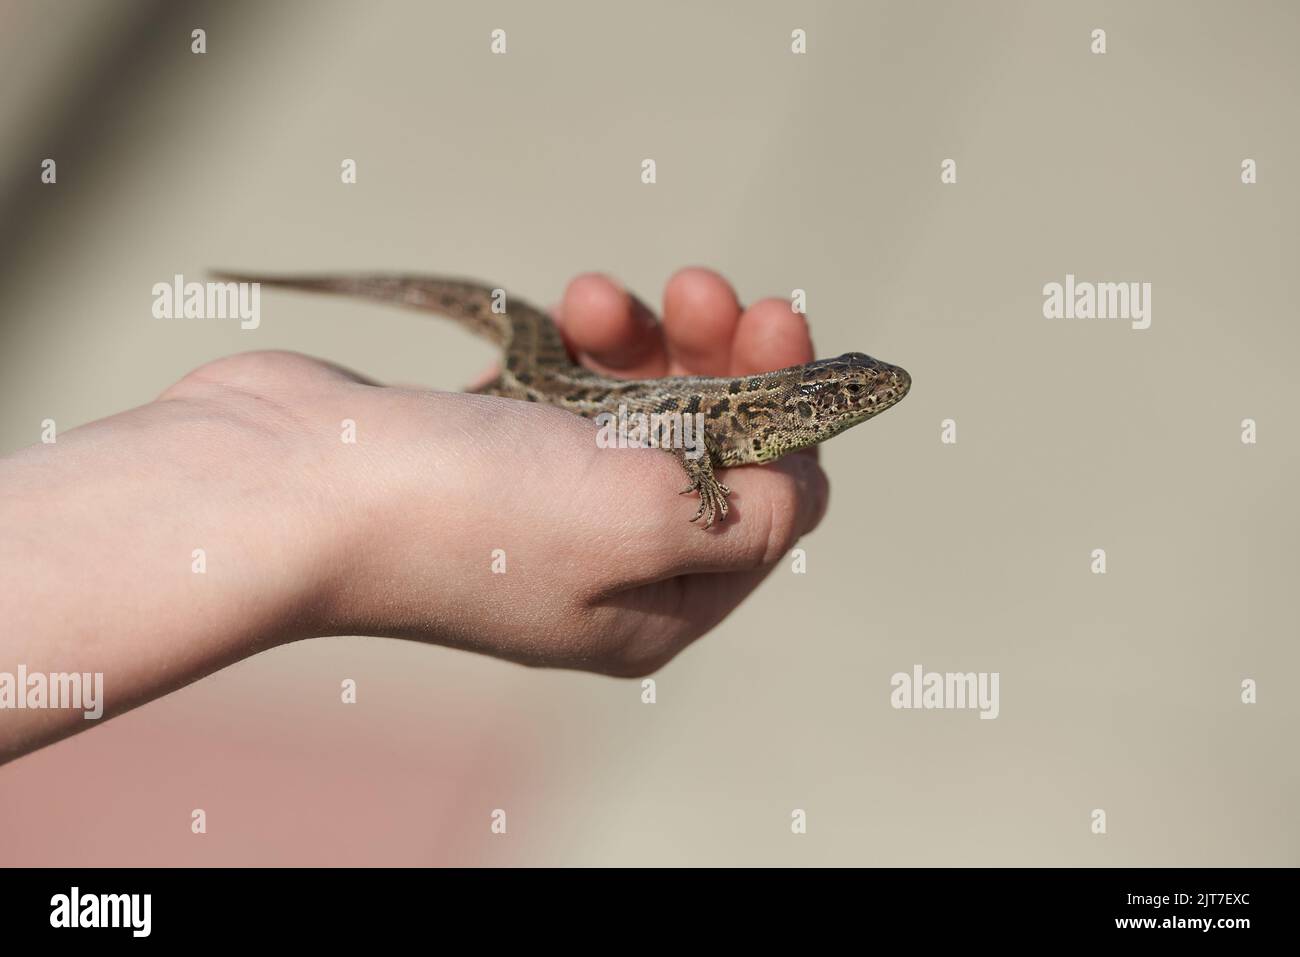 Child holding a lizard in his hands Stock Photo